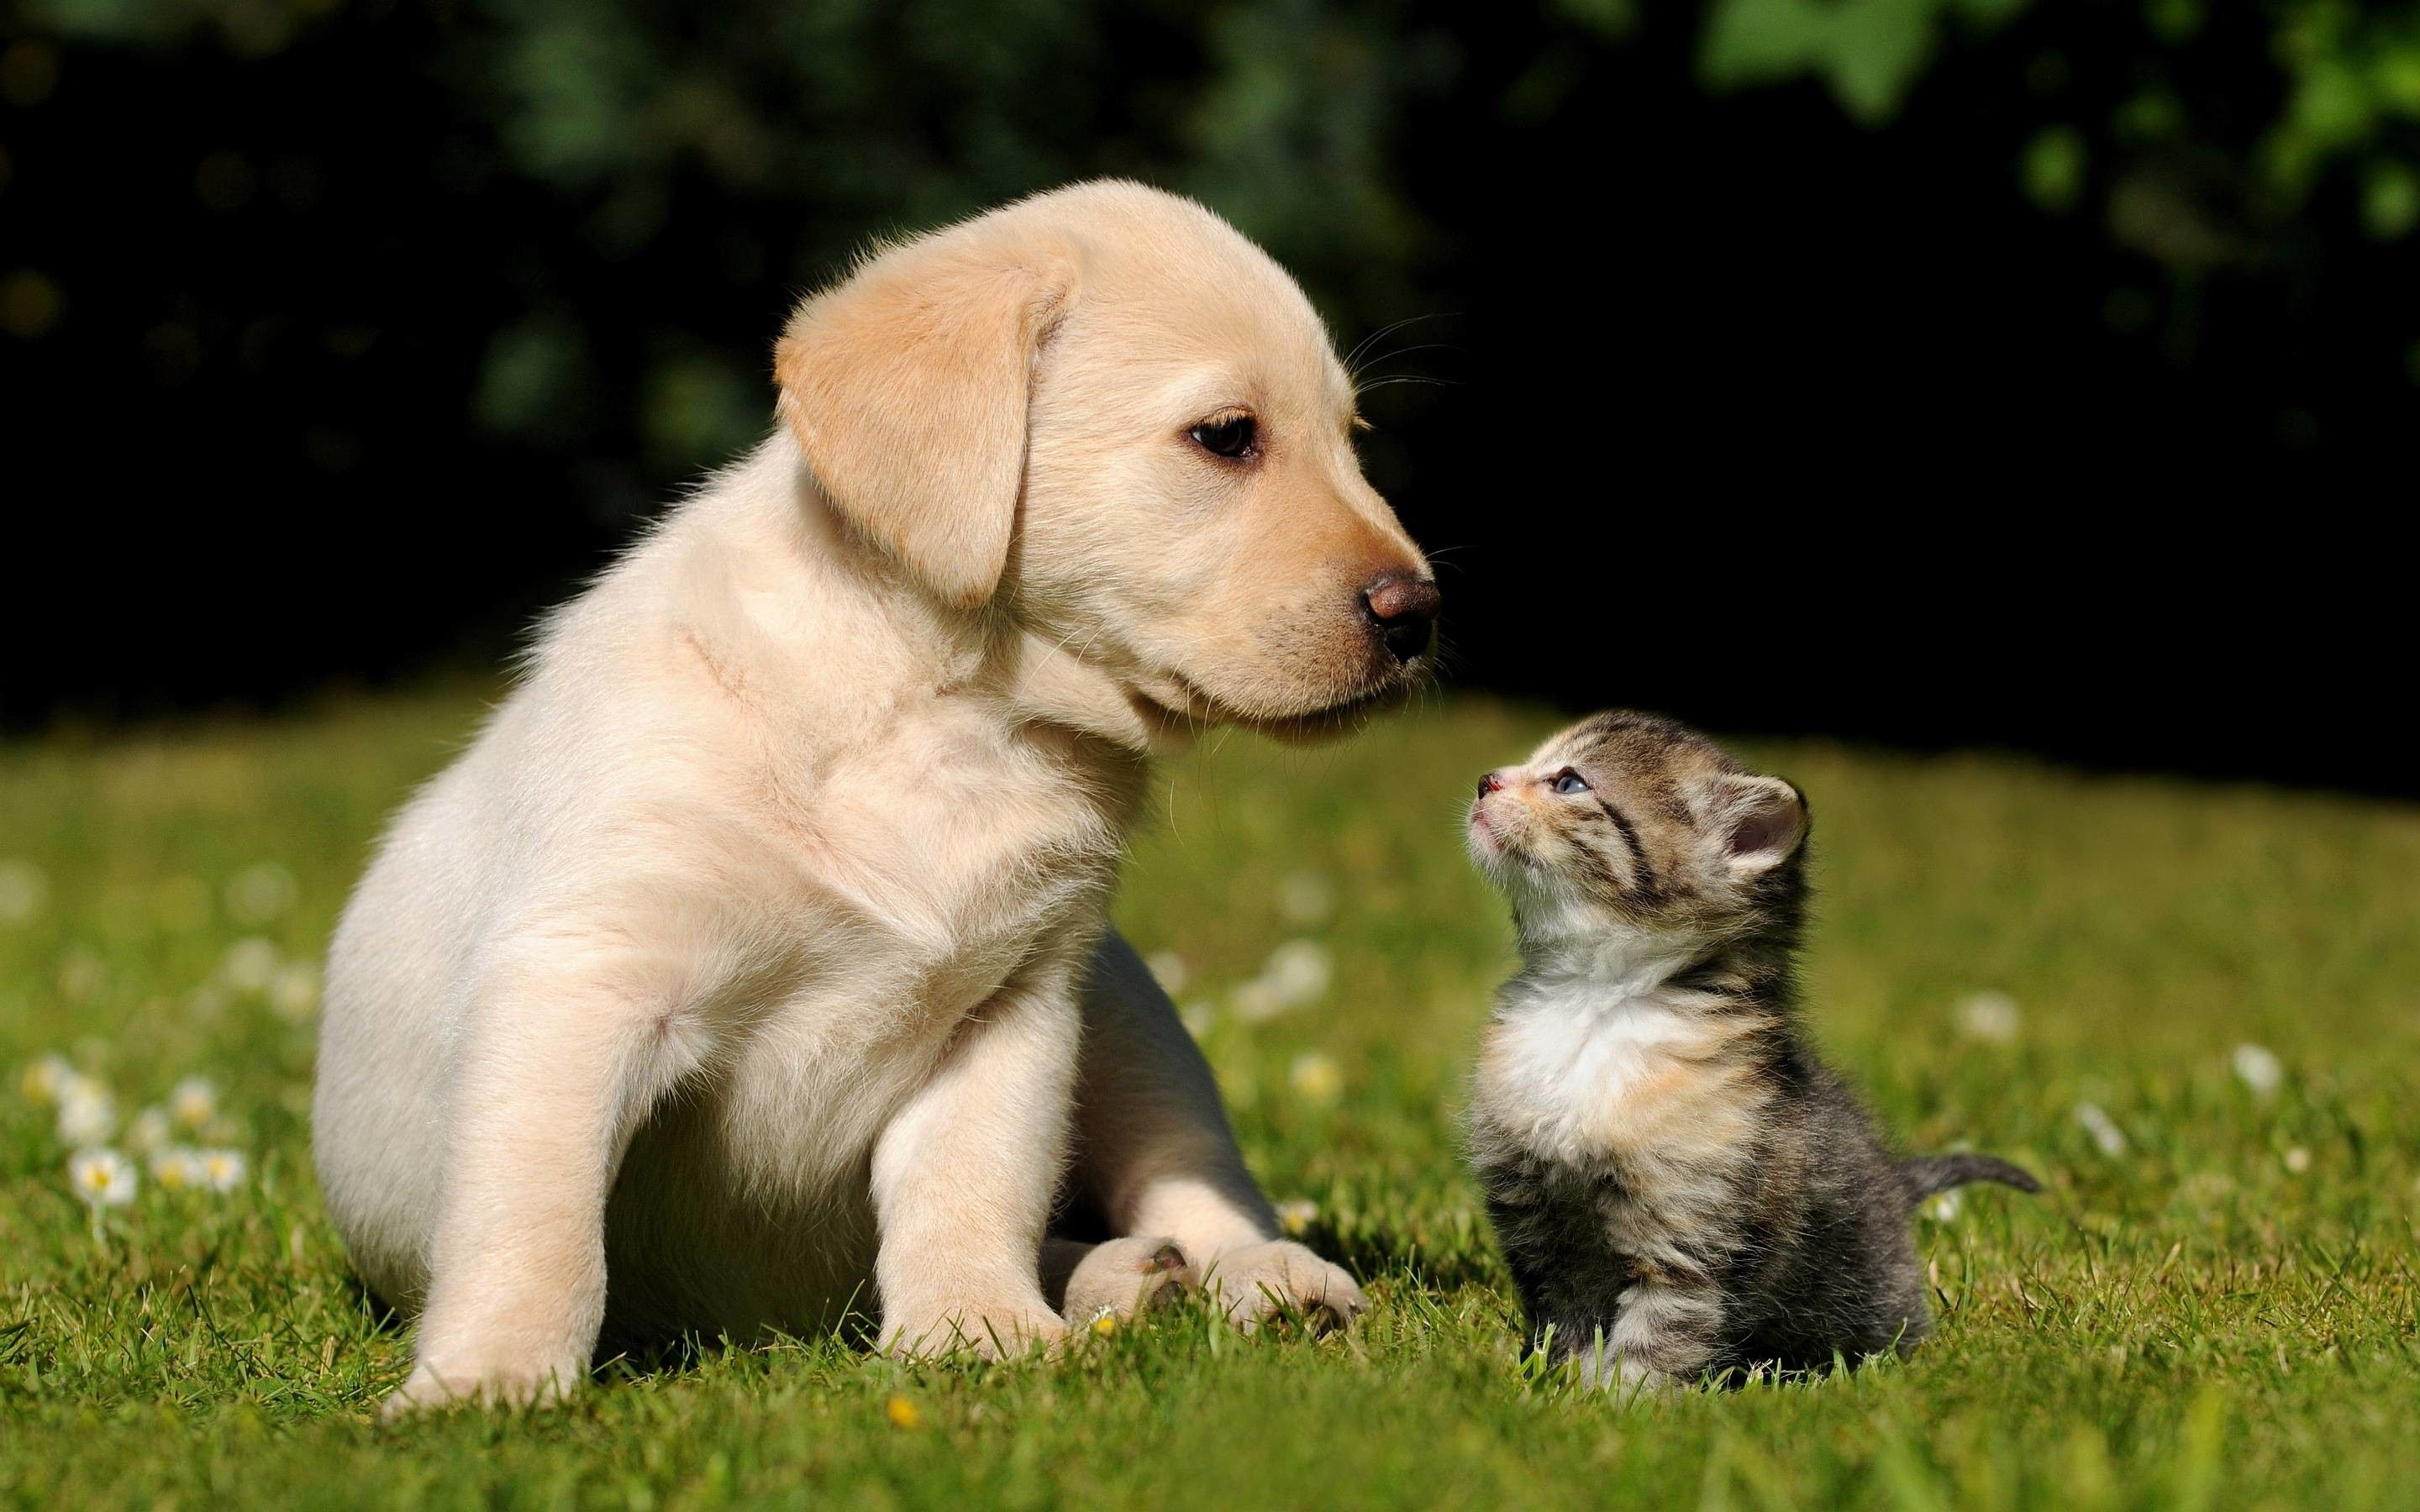 Cute Puppies and Kittens Wallpapers on WallpaperDog